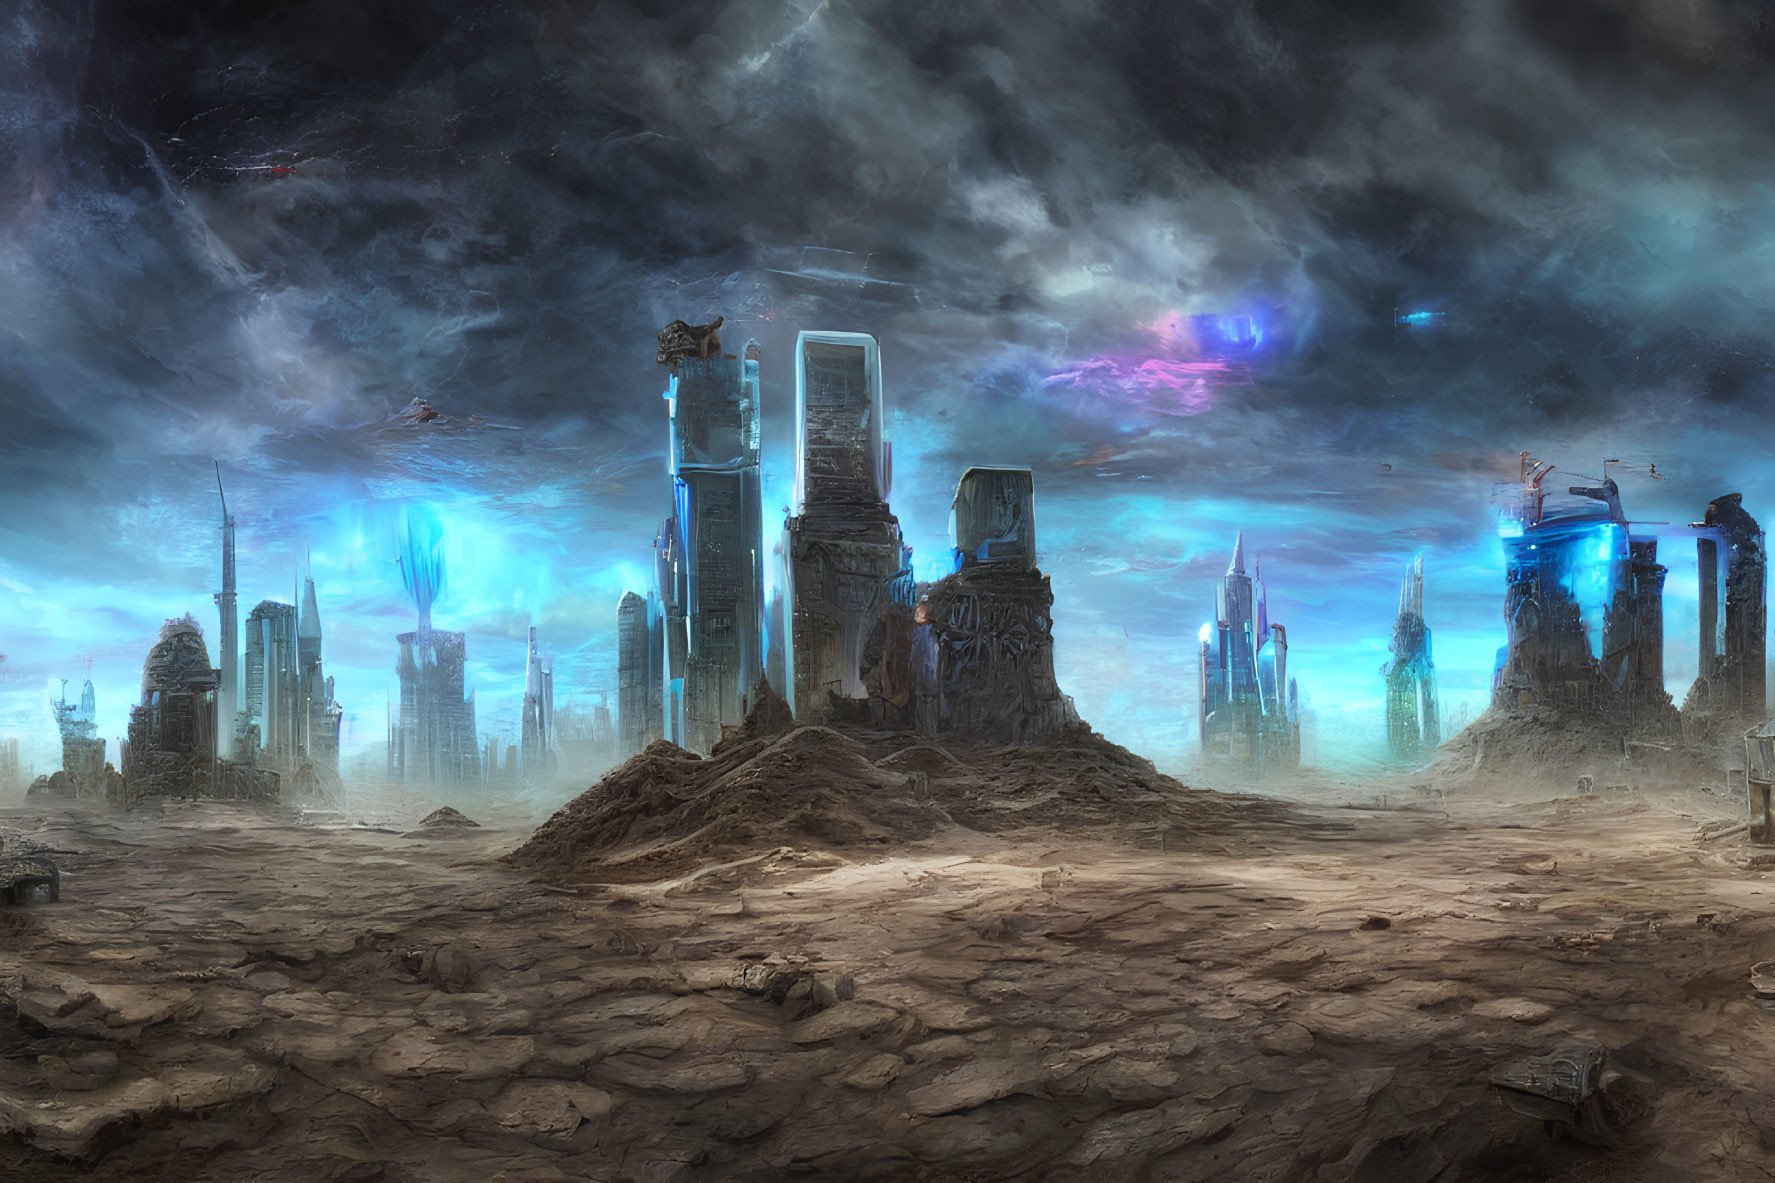 Dystopian landscape with ruins, futuristic skyscrapers, and stormy sky